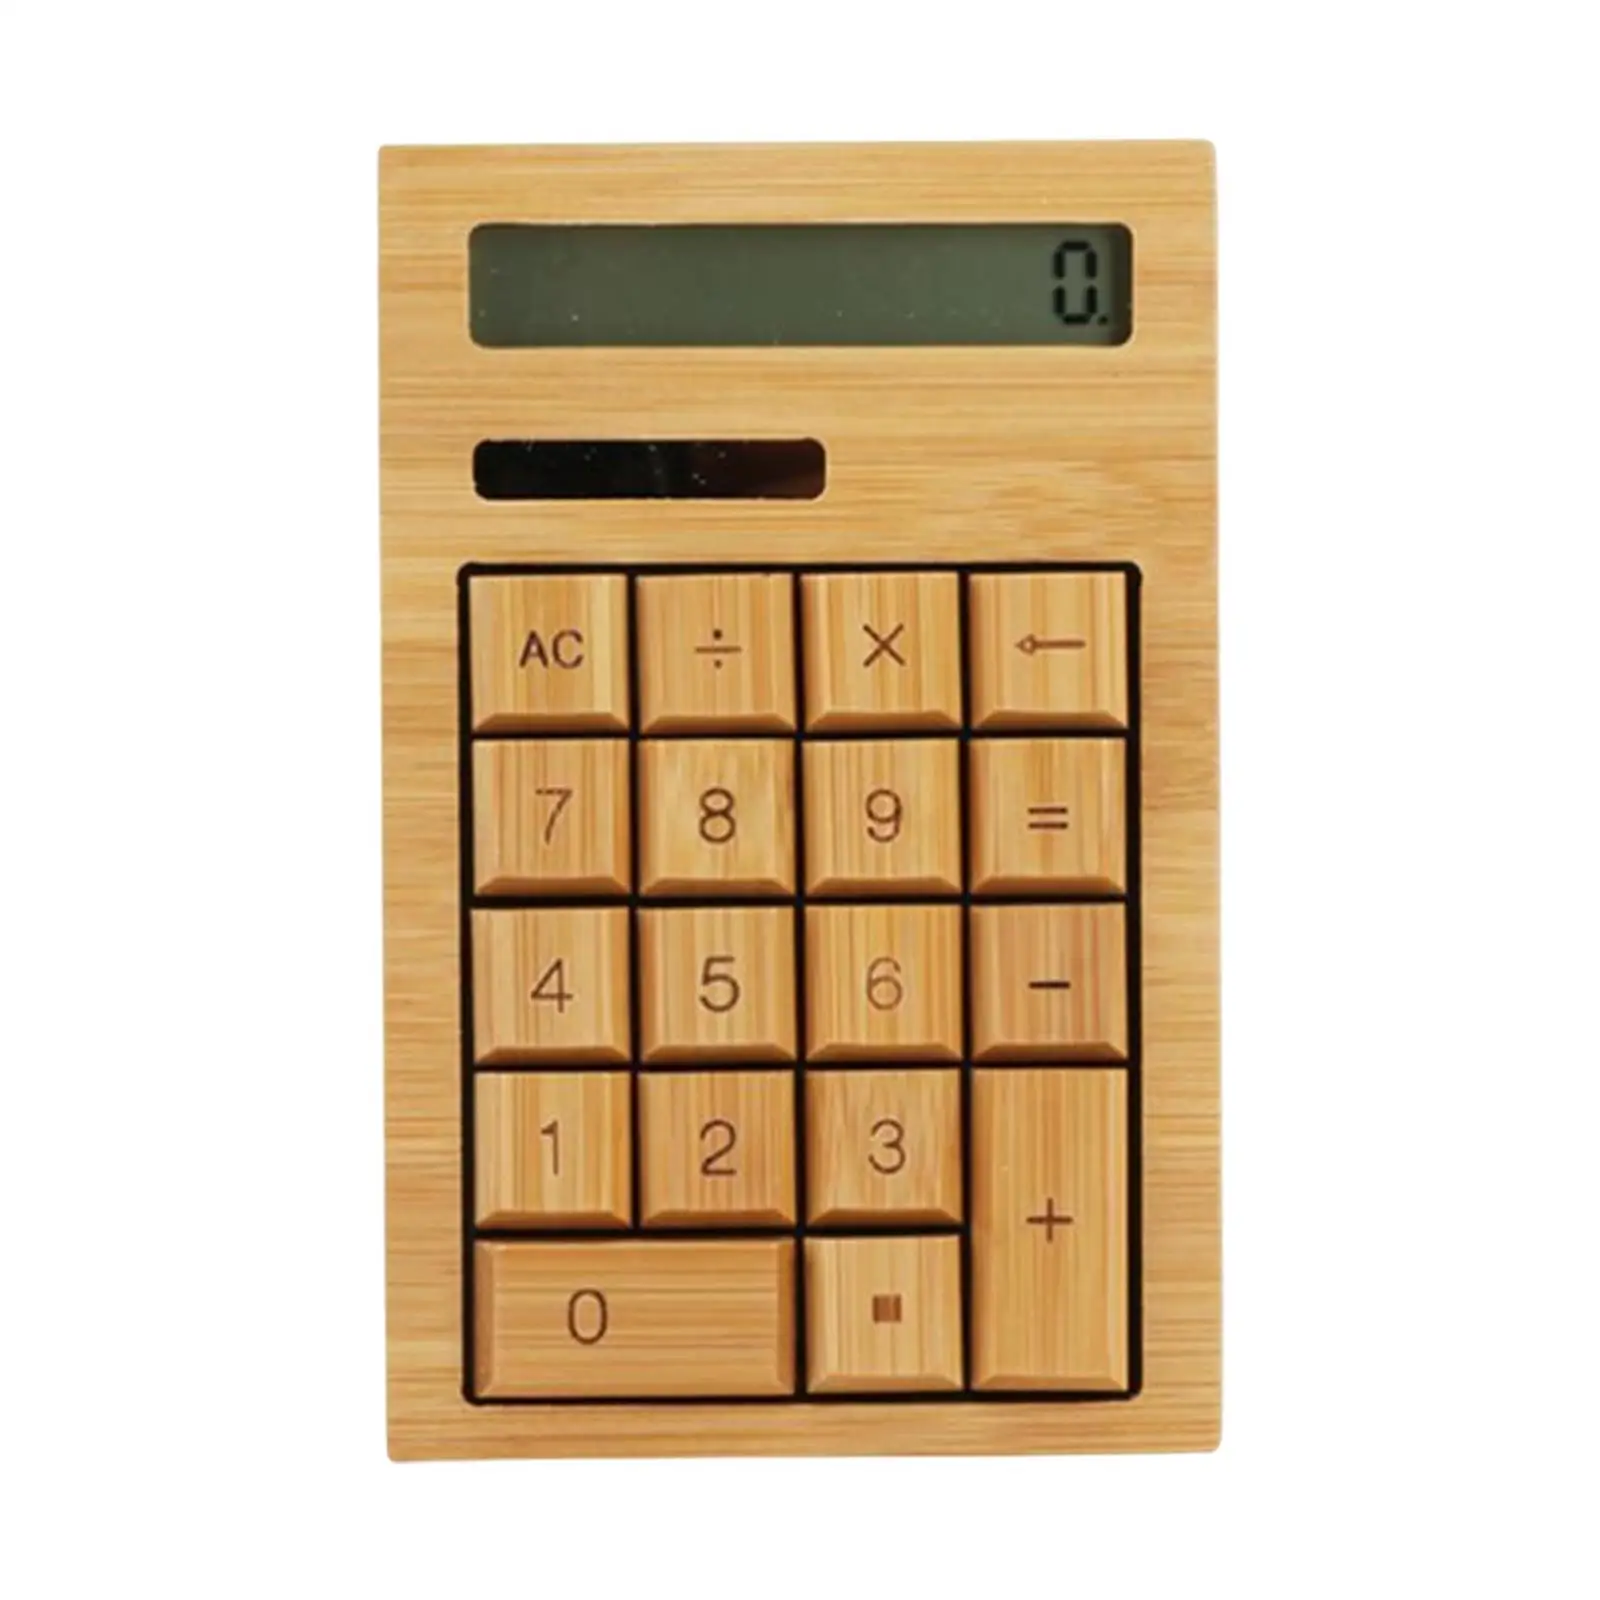 Bamboo Calculator Solar Power Portable 18 Buttons Anti Static 12 digits Desktop Calculator Functional for Business Office Home